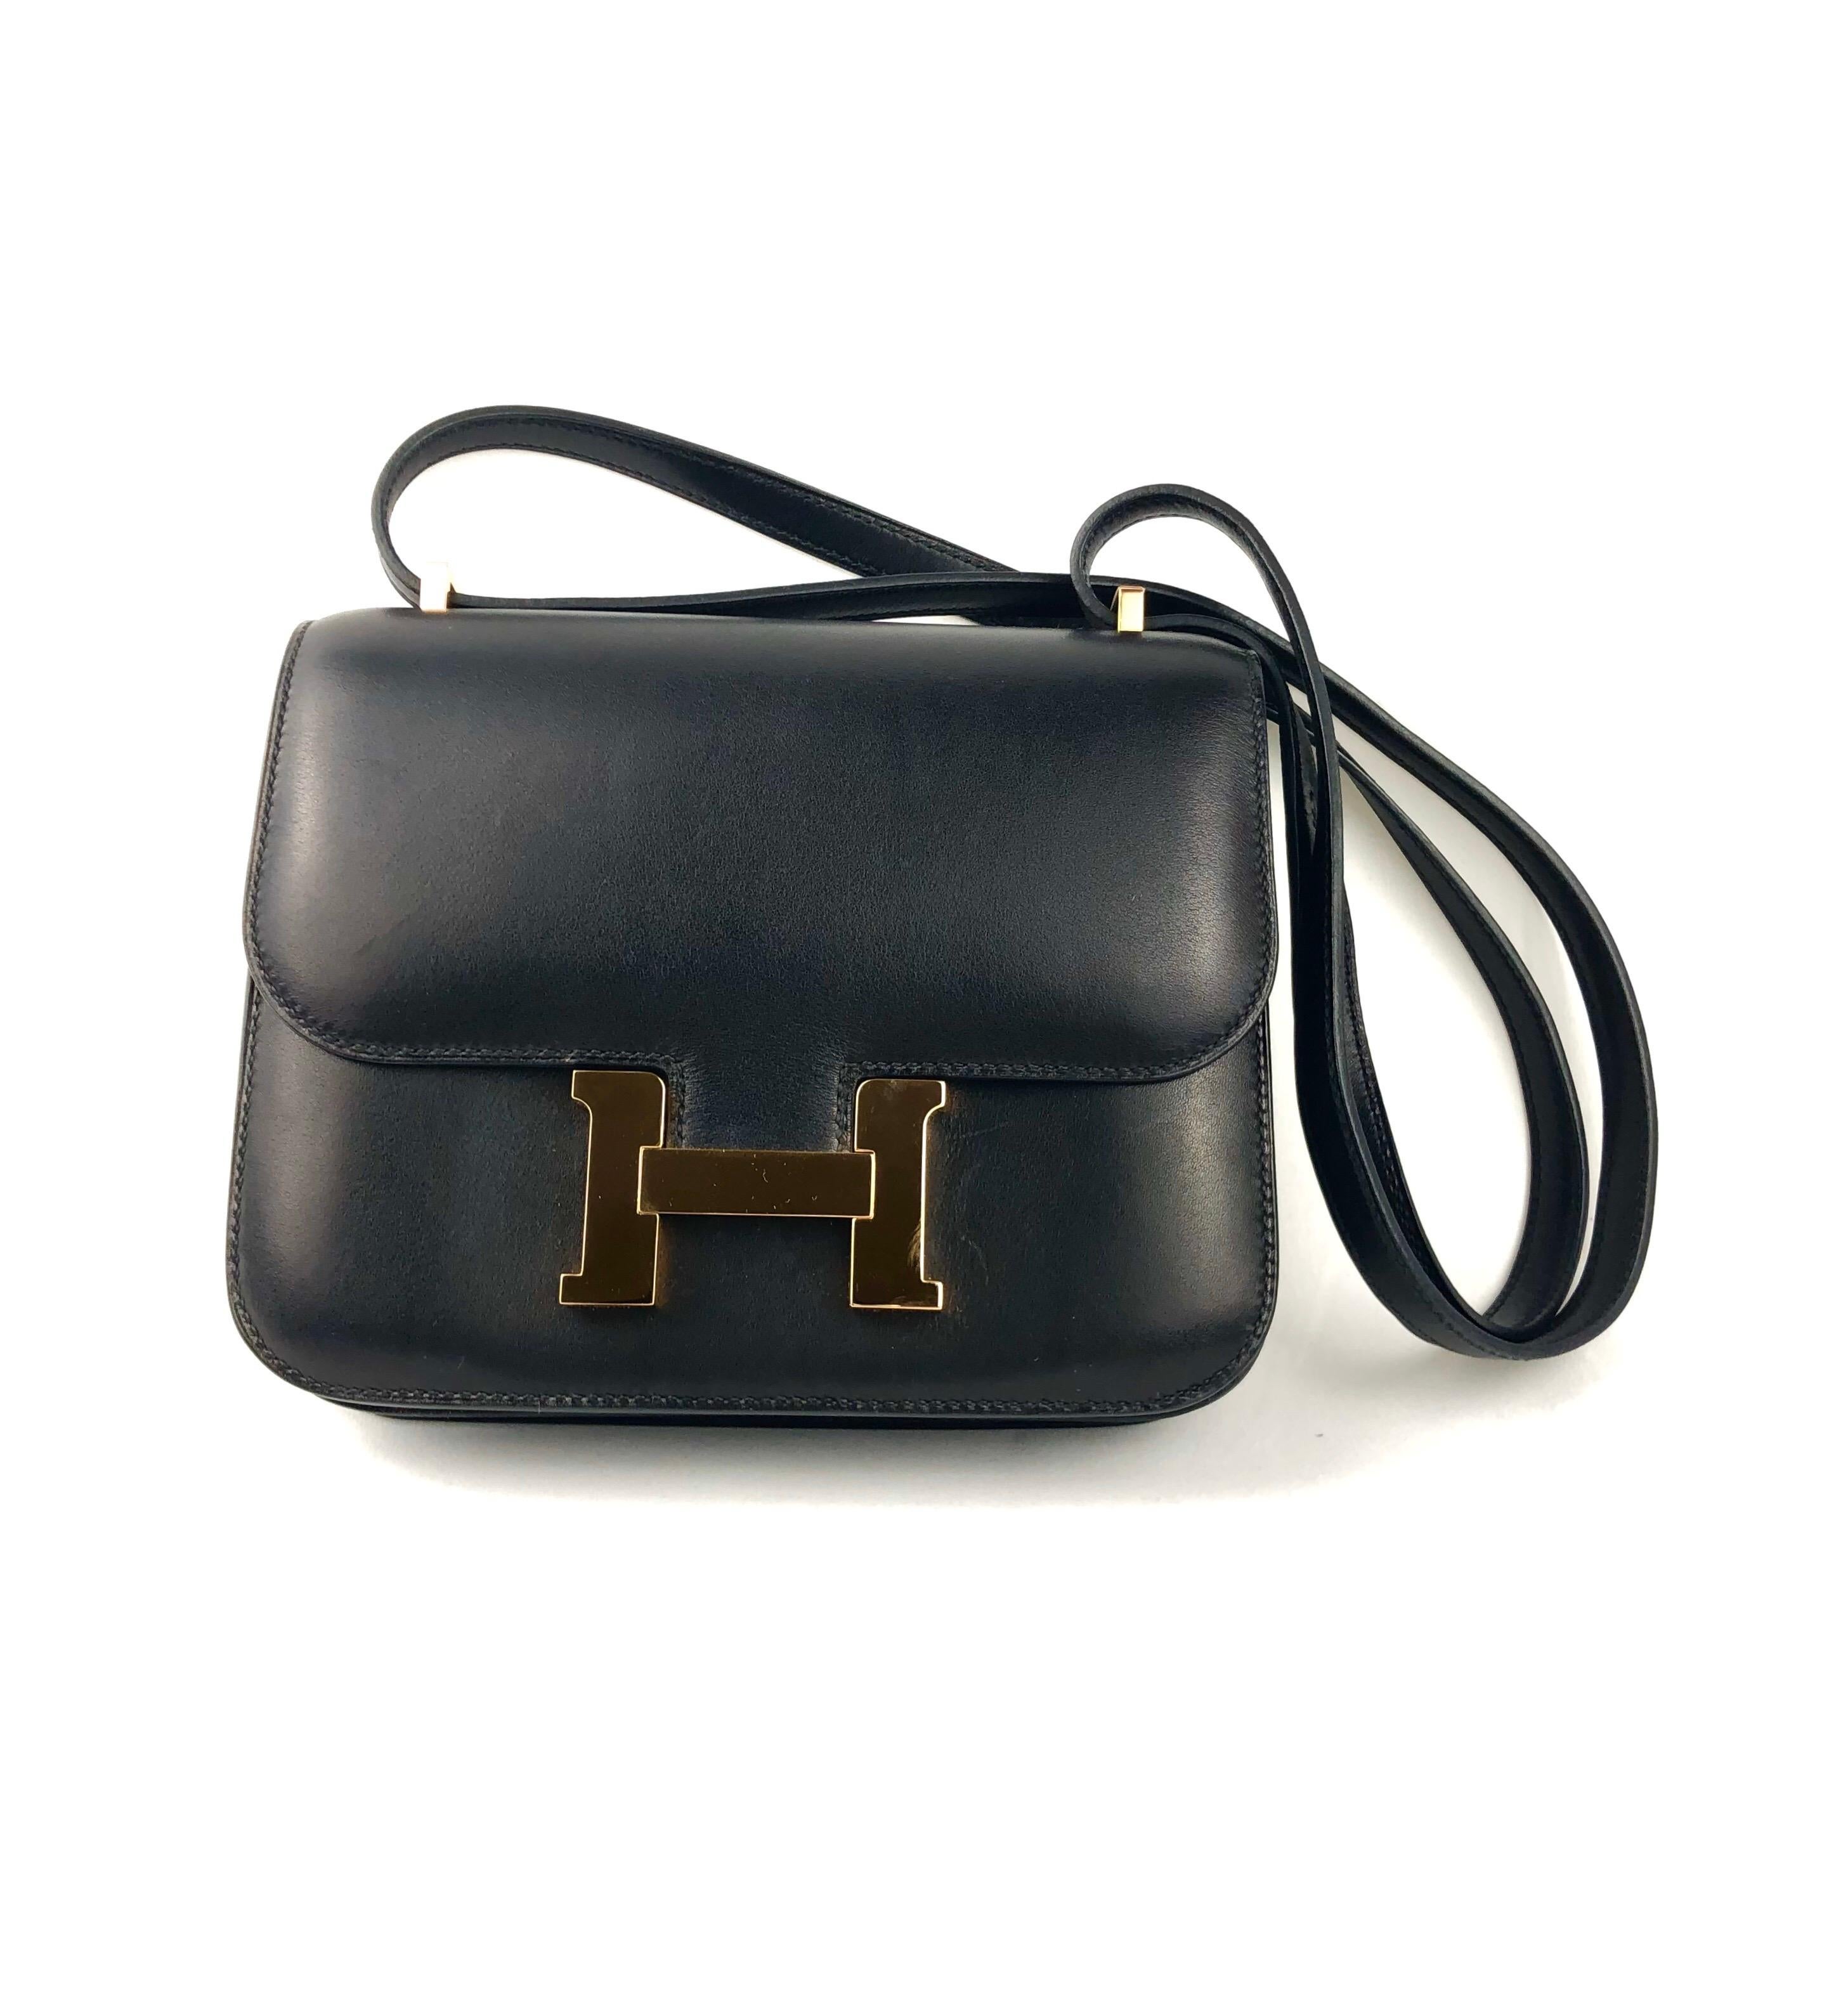 Hermes Constance 18 Black Evercalf Rose Gold Hardware. Excellent Condition some light hairlines on hardware. X Stamp 2016.

Shop with confidence from Lux Addicts. Authenticity guaranteed or money back.